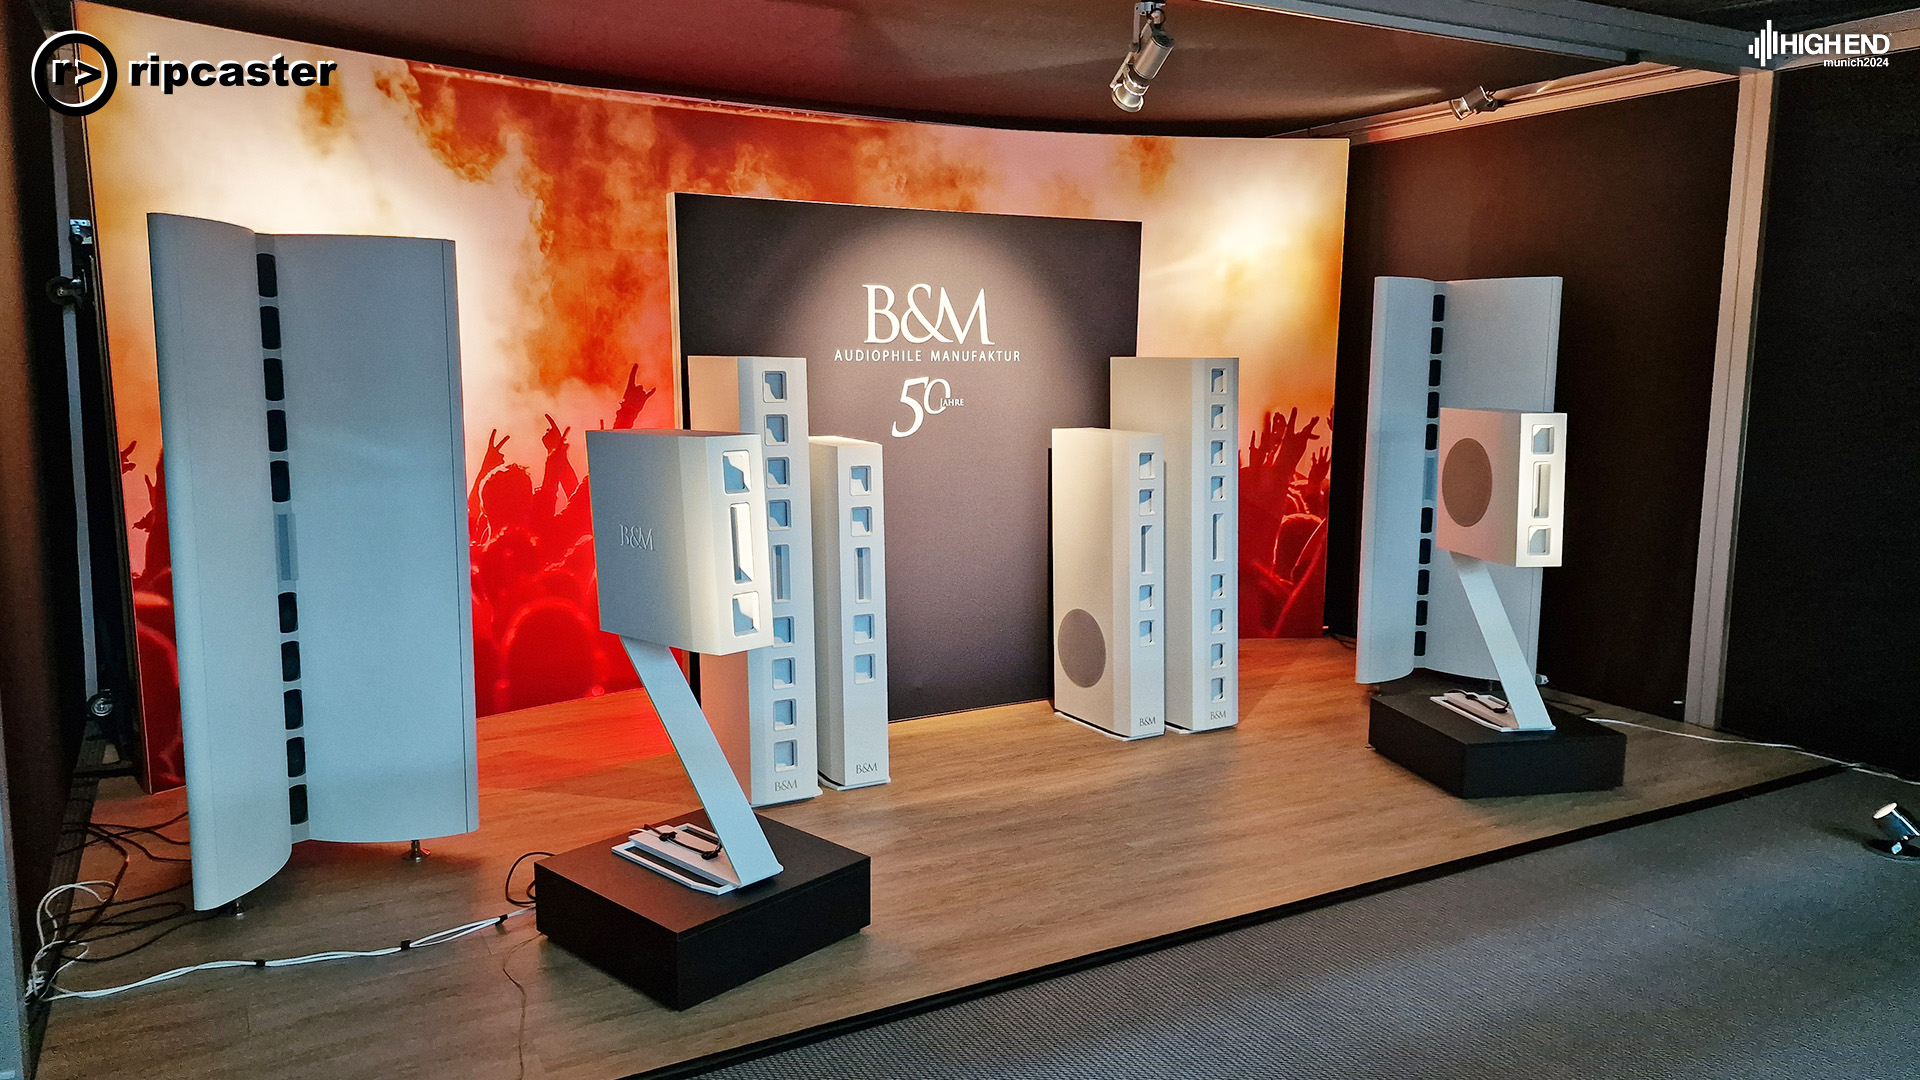 A lot of white floorstanding speakers together with some bookshelf white speakers on a stand.  This is B&M